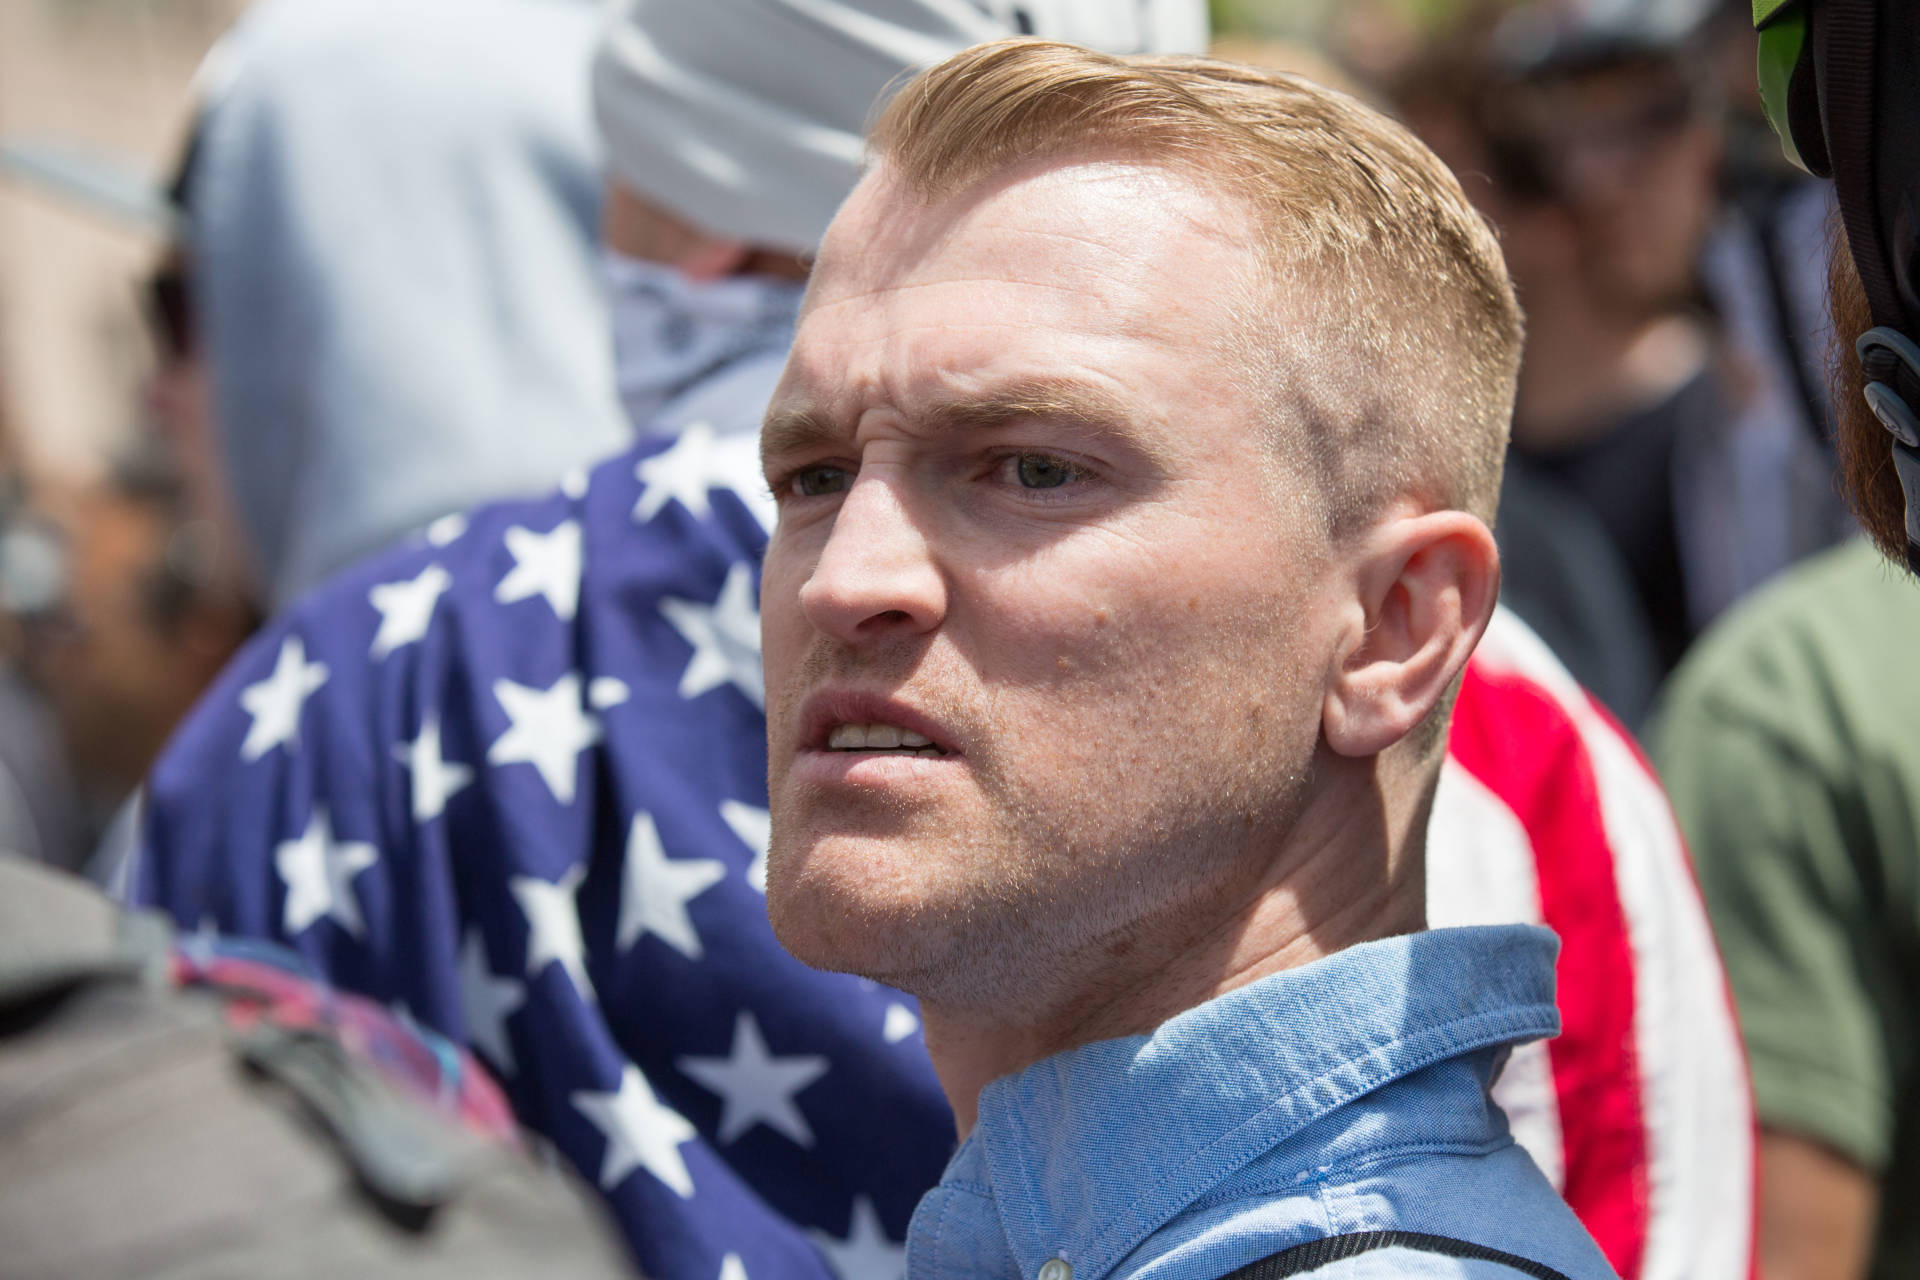 Nathan Damigo, the founder of white nationalist group Identity Evropa, at a right-wing rally in Berkeley on April 15, 2017. He helped organize the white supremacist rally in Charlottesville, Virginia, where one counterprotester was killed on Saturday. Bert Johnson/KQED